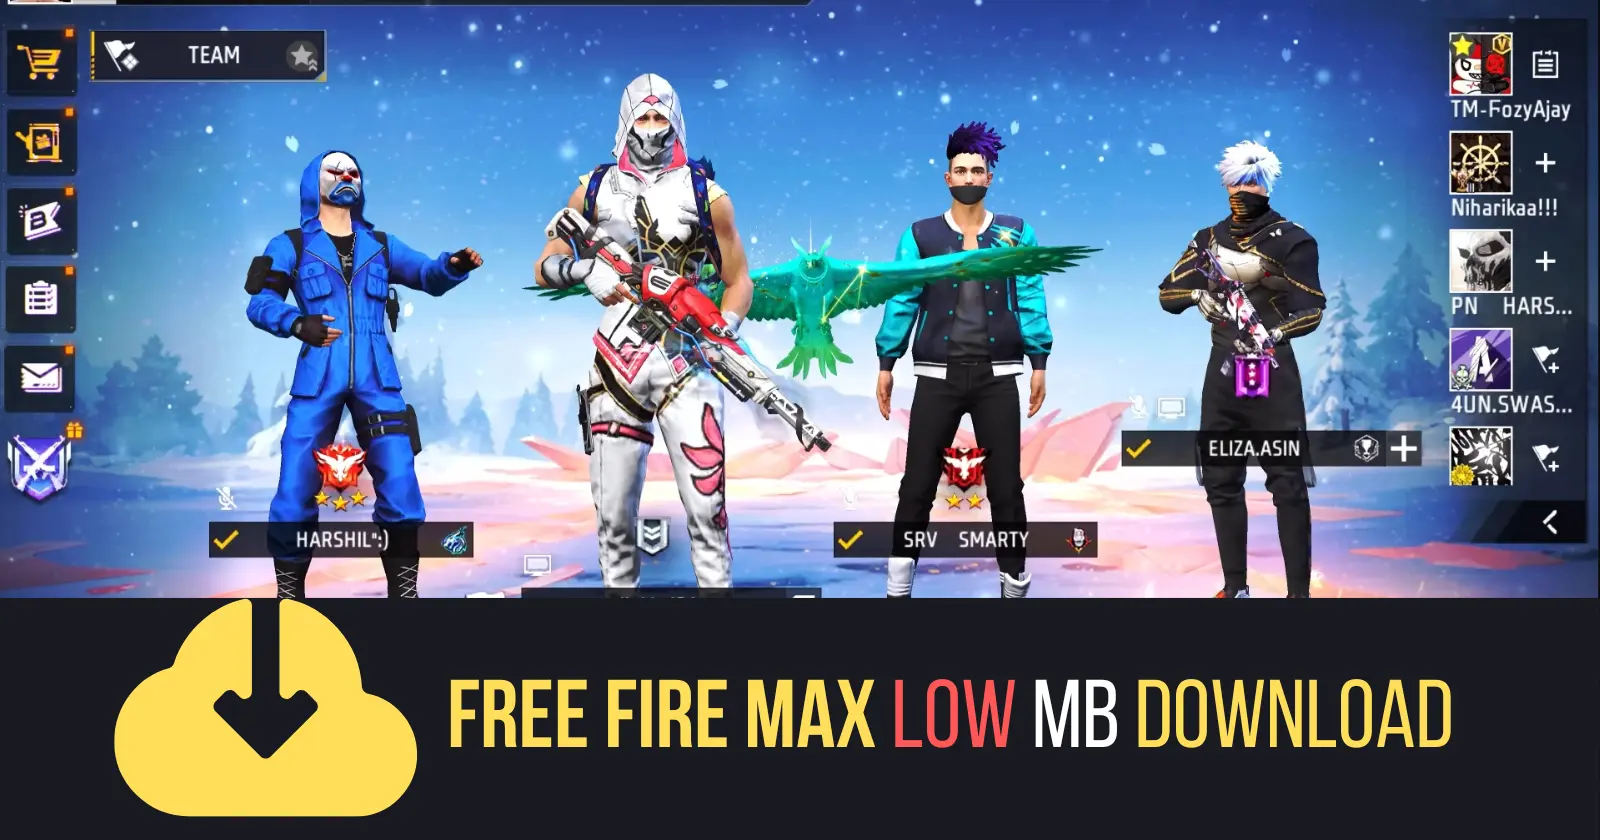 Free Fire Max characters with distinct outfits and weapons, set against a snowy mountain backdrop; a download button and text indicate it’s a low MB download.